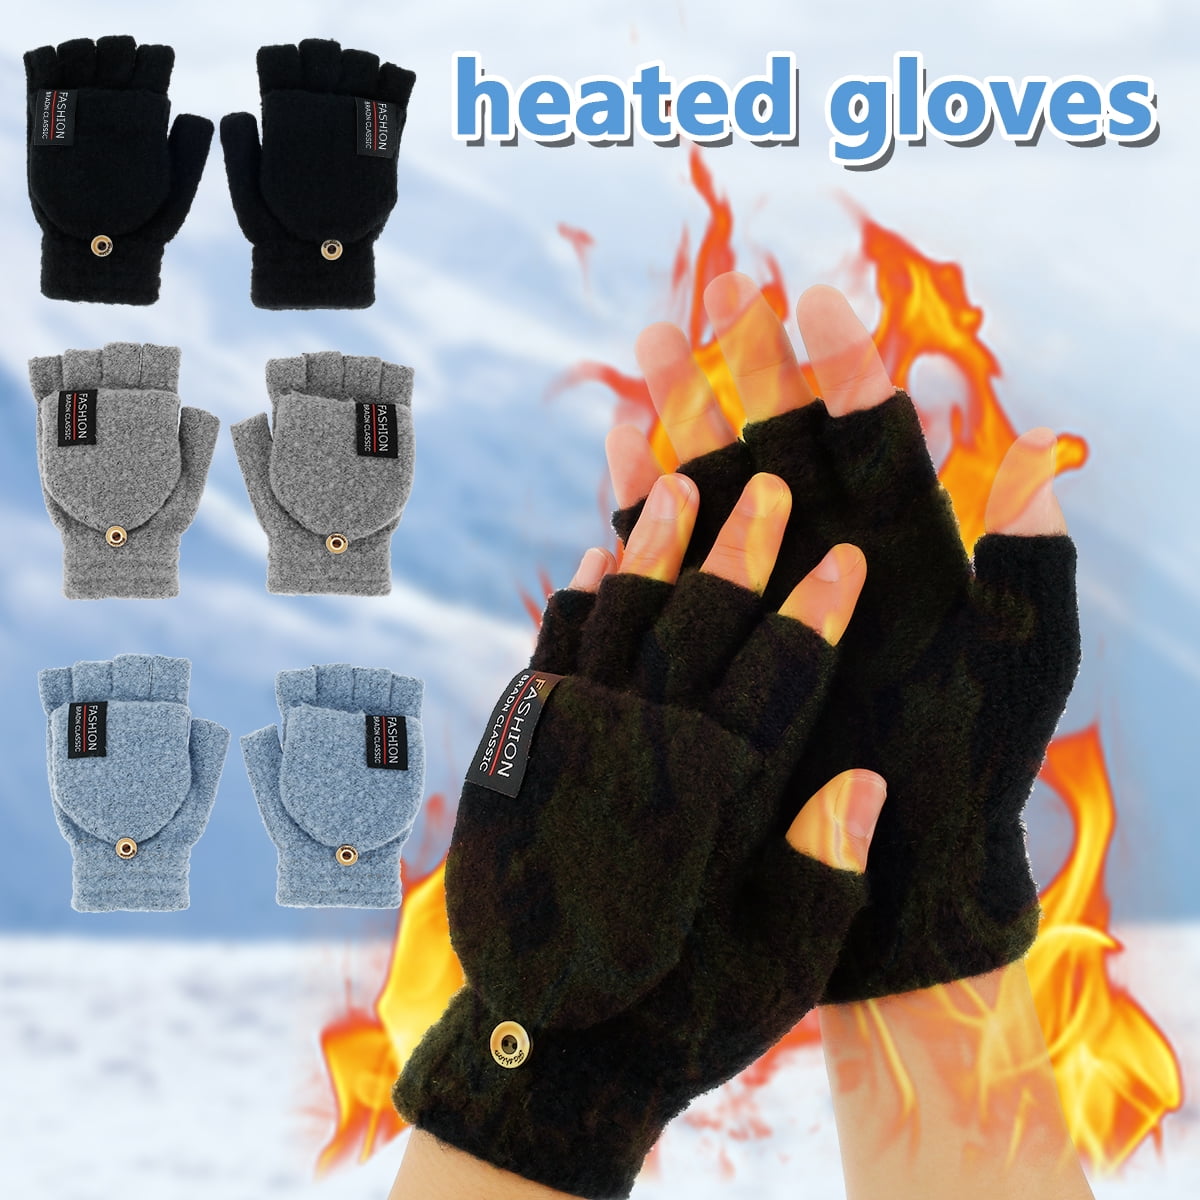 Littleduckling USB Heated Gloves 5V Low Voltage Electric Thermal Mitten  Gloves Full & Half Hands Heated Gloves Knitting Fingerless Heating Hands  Warmer for Working Cycling Running 